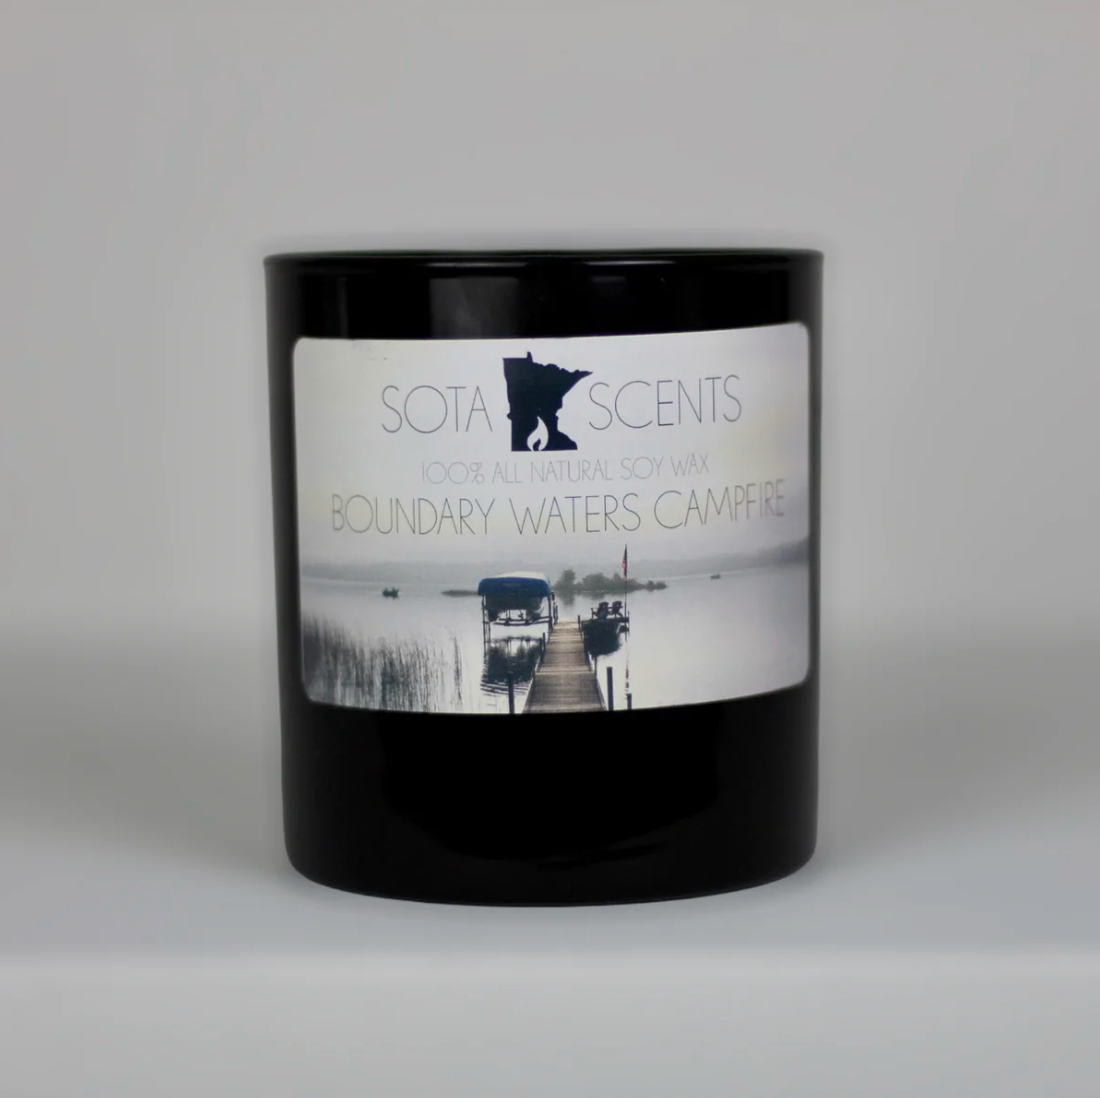 Sota Scents Boundary Waters Campfire Candle